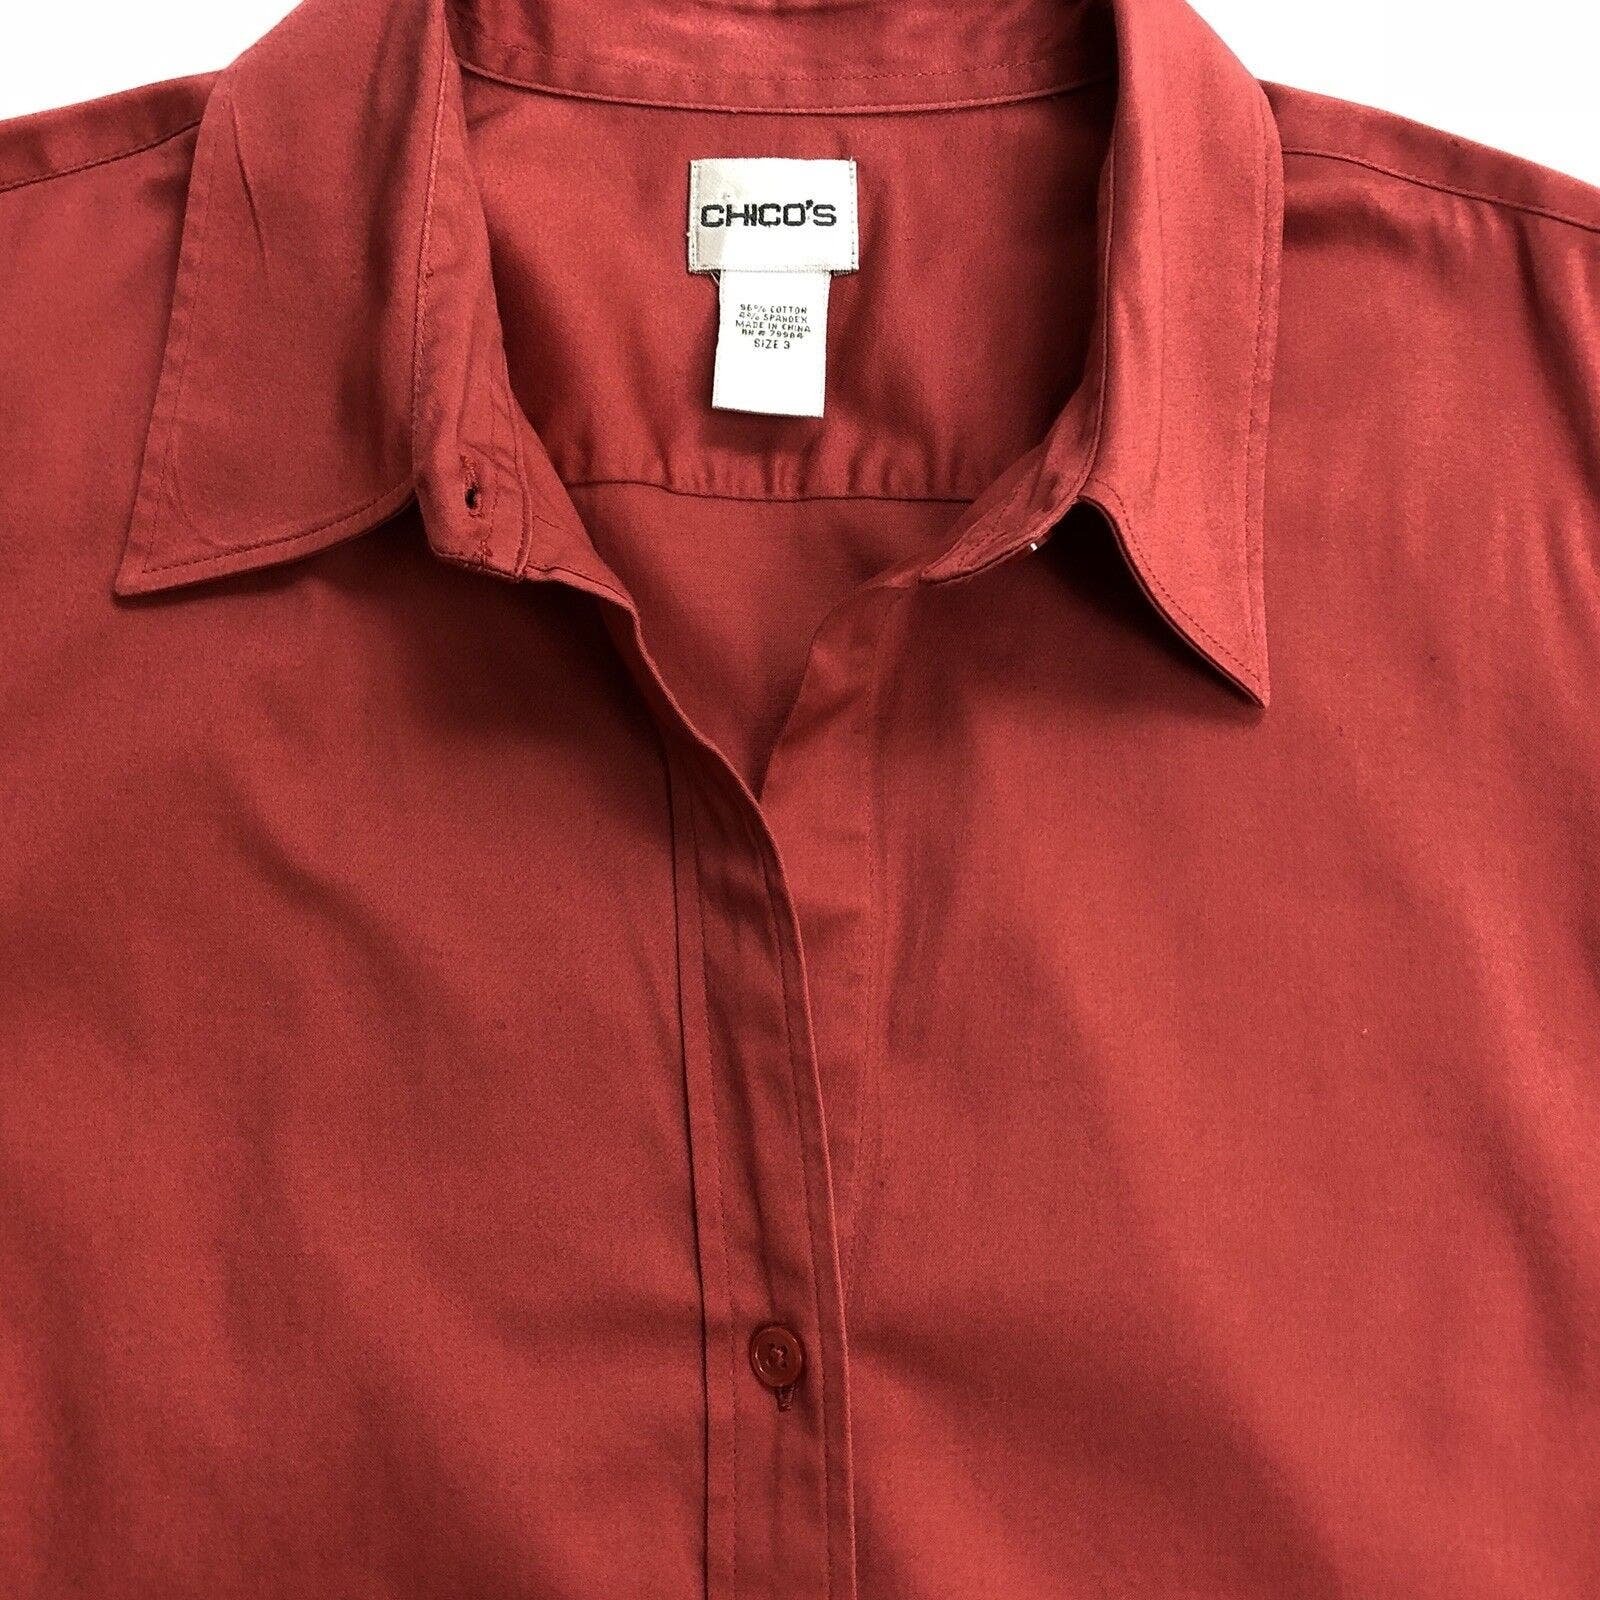 Great Chico´s Button Up Shirt Women Size 3 Rust Stretch Top Cotton Blend Work Classic L776AWDe1 Cool